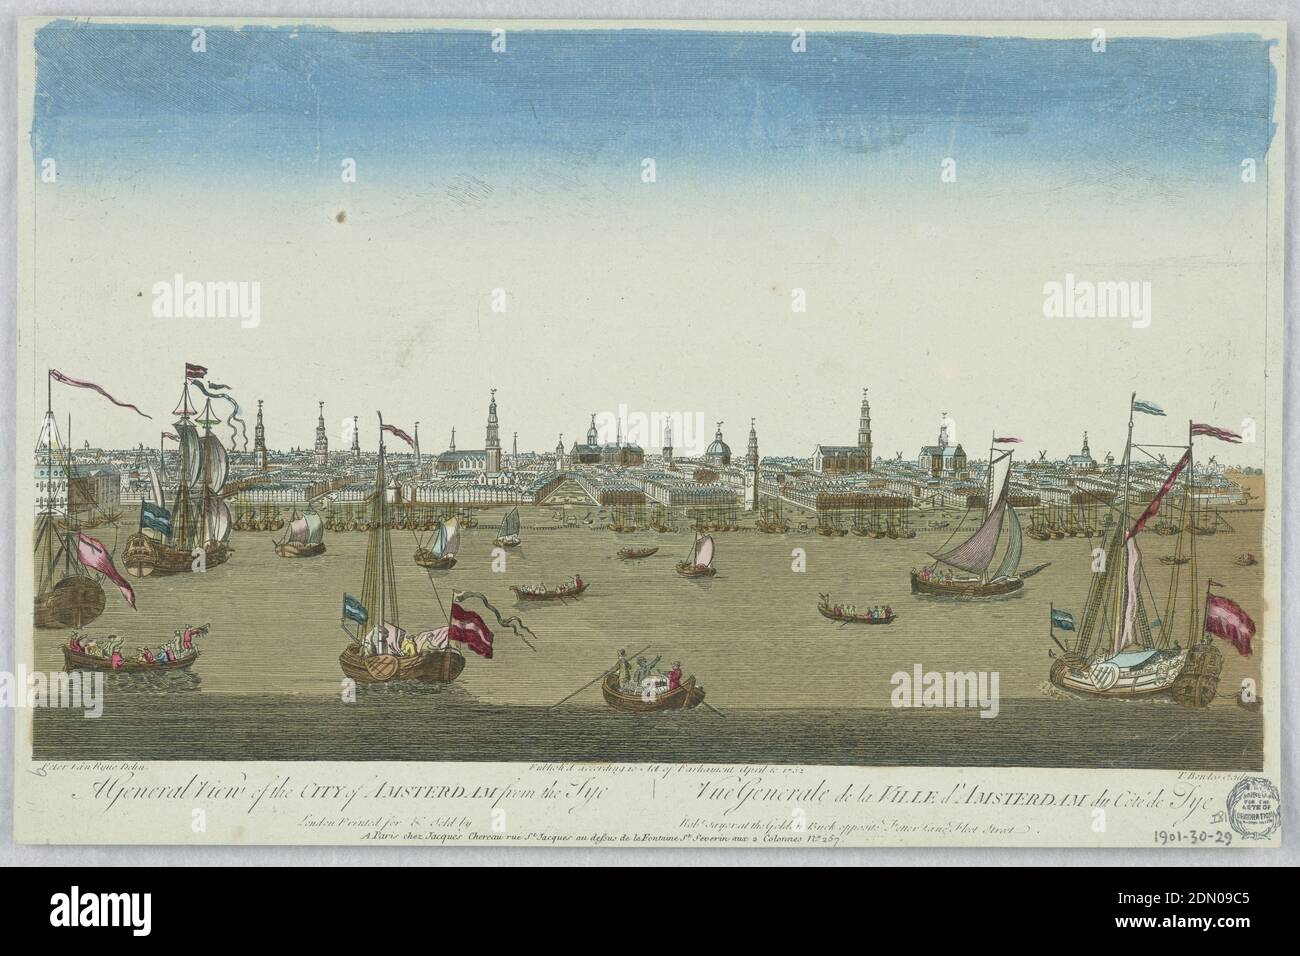 Peep-show, Vue Generale de la Ville d'Amsterdan du Côté de Tye (A General View of the City of Amsterdam from the Tye), Thomas Bowles, British, 1712 - after 1753, Peter Van Ryne, Engraving in ink with washes of watercolor on paper, mounted on scrapbook page, Peep-show print, France, 1752, Print Stock Photo